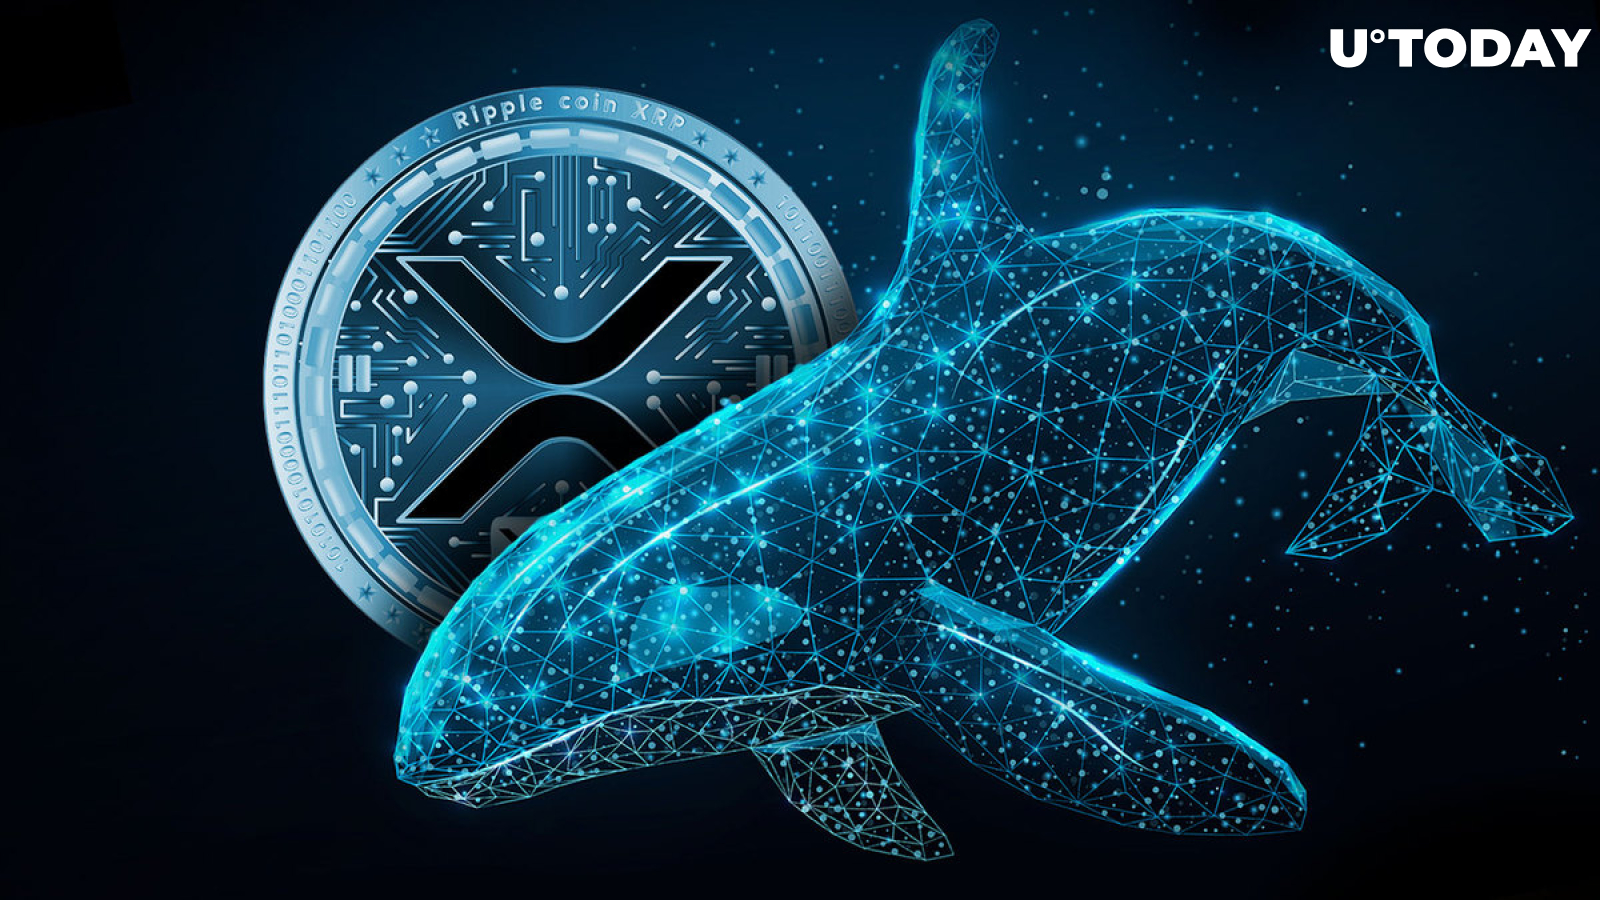 Ripple Sells Millions of XRP After Receiving 100 Million XRP From Mysterious Whale